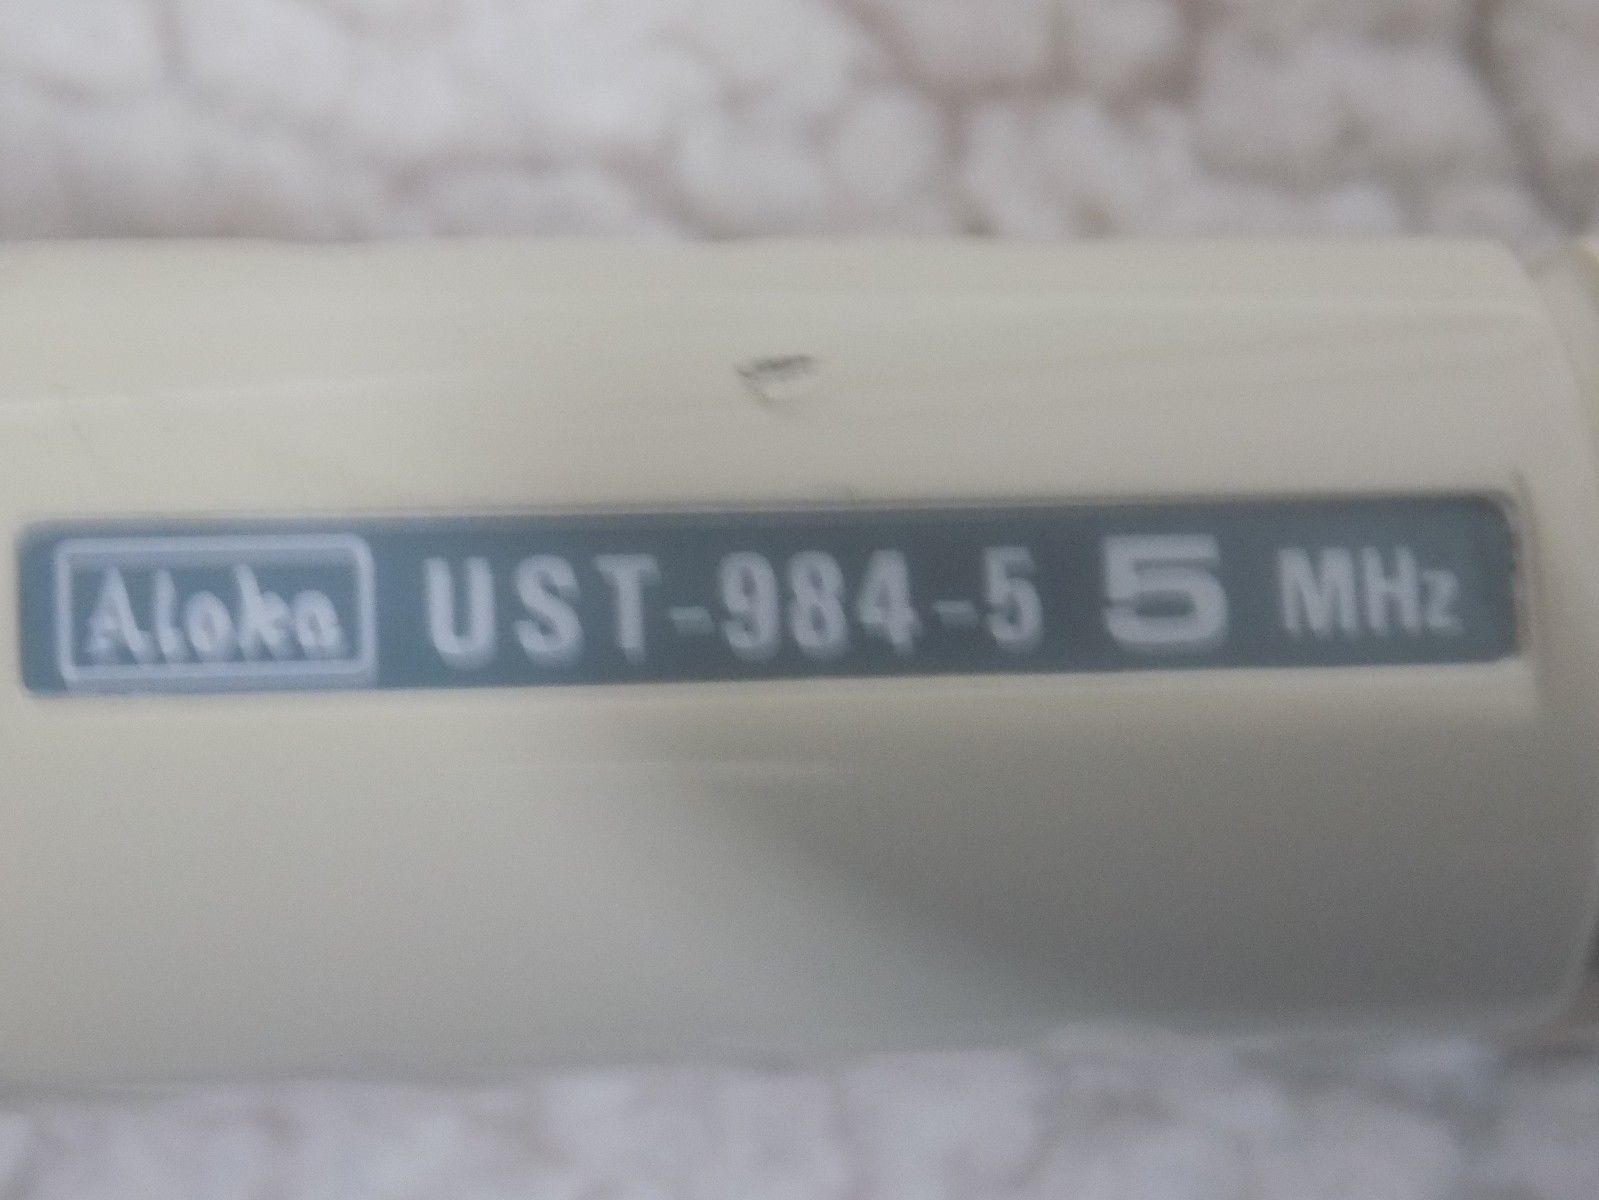 Aloka ust-984-5 Ultrasound Probe / Transducer PLEASE READ ENTIRE LISTING DIAGNOSTIC ULTRASOUND MACHINES FOR SALE